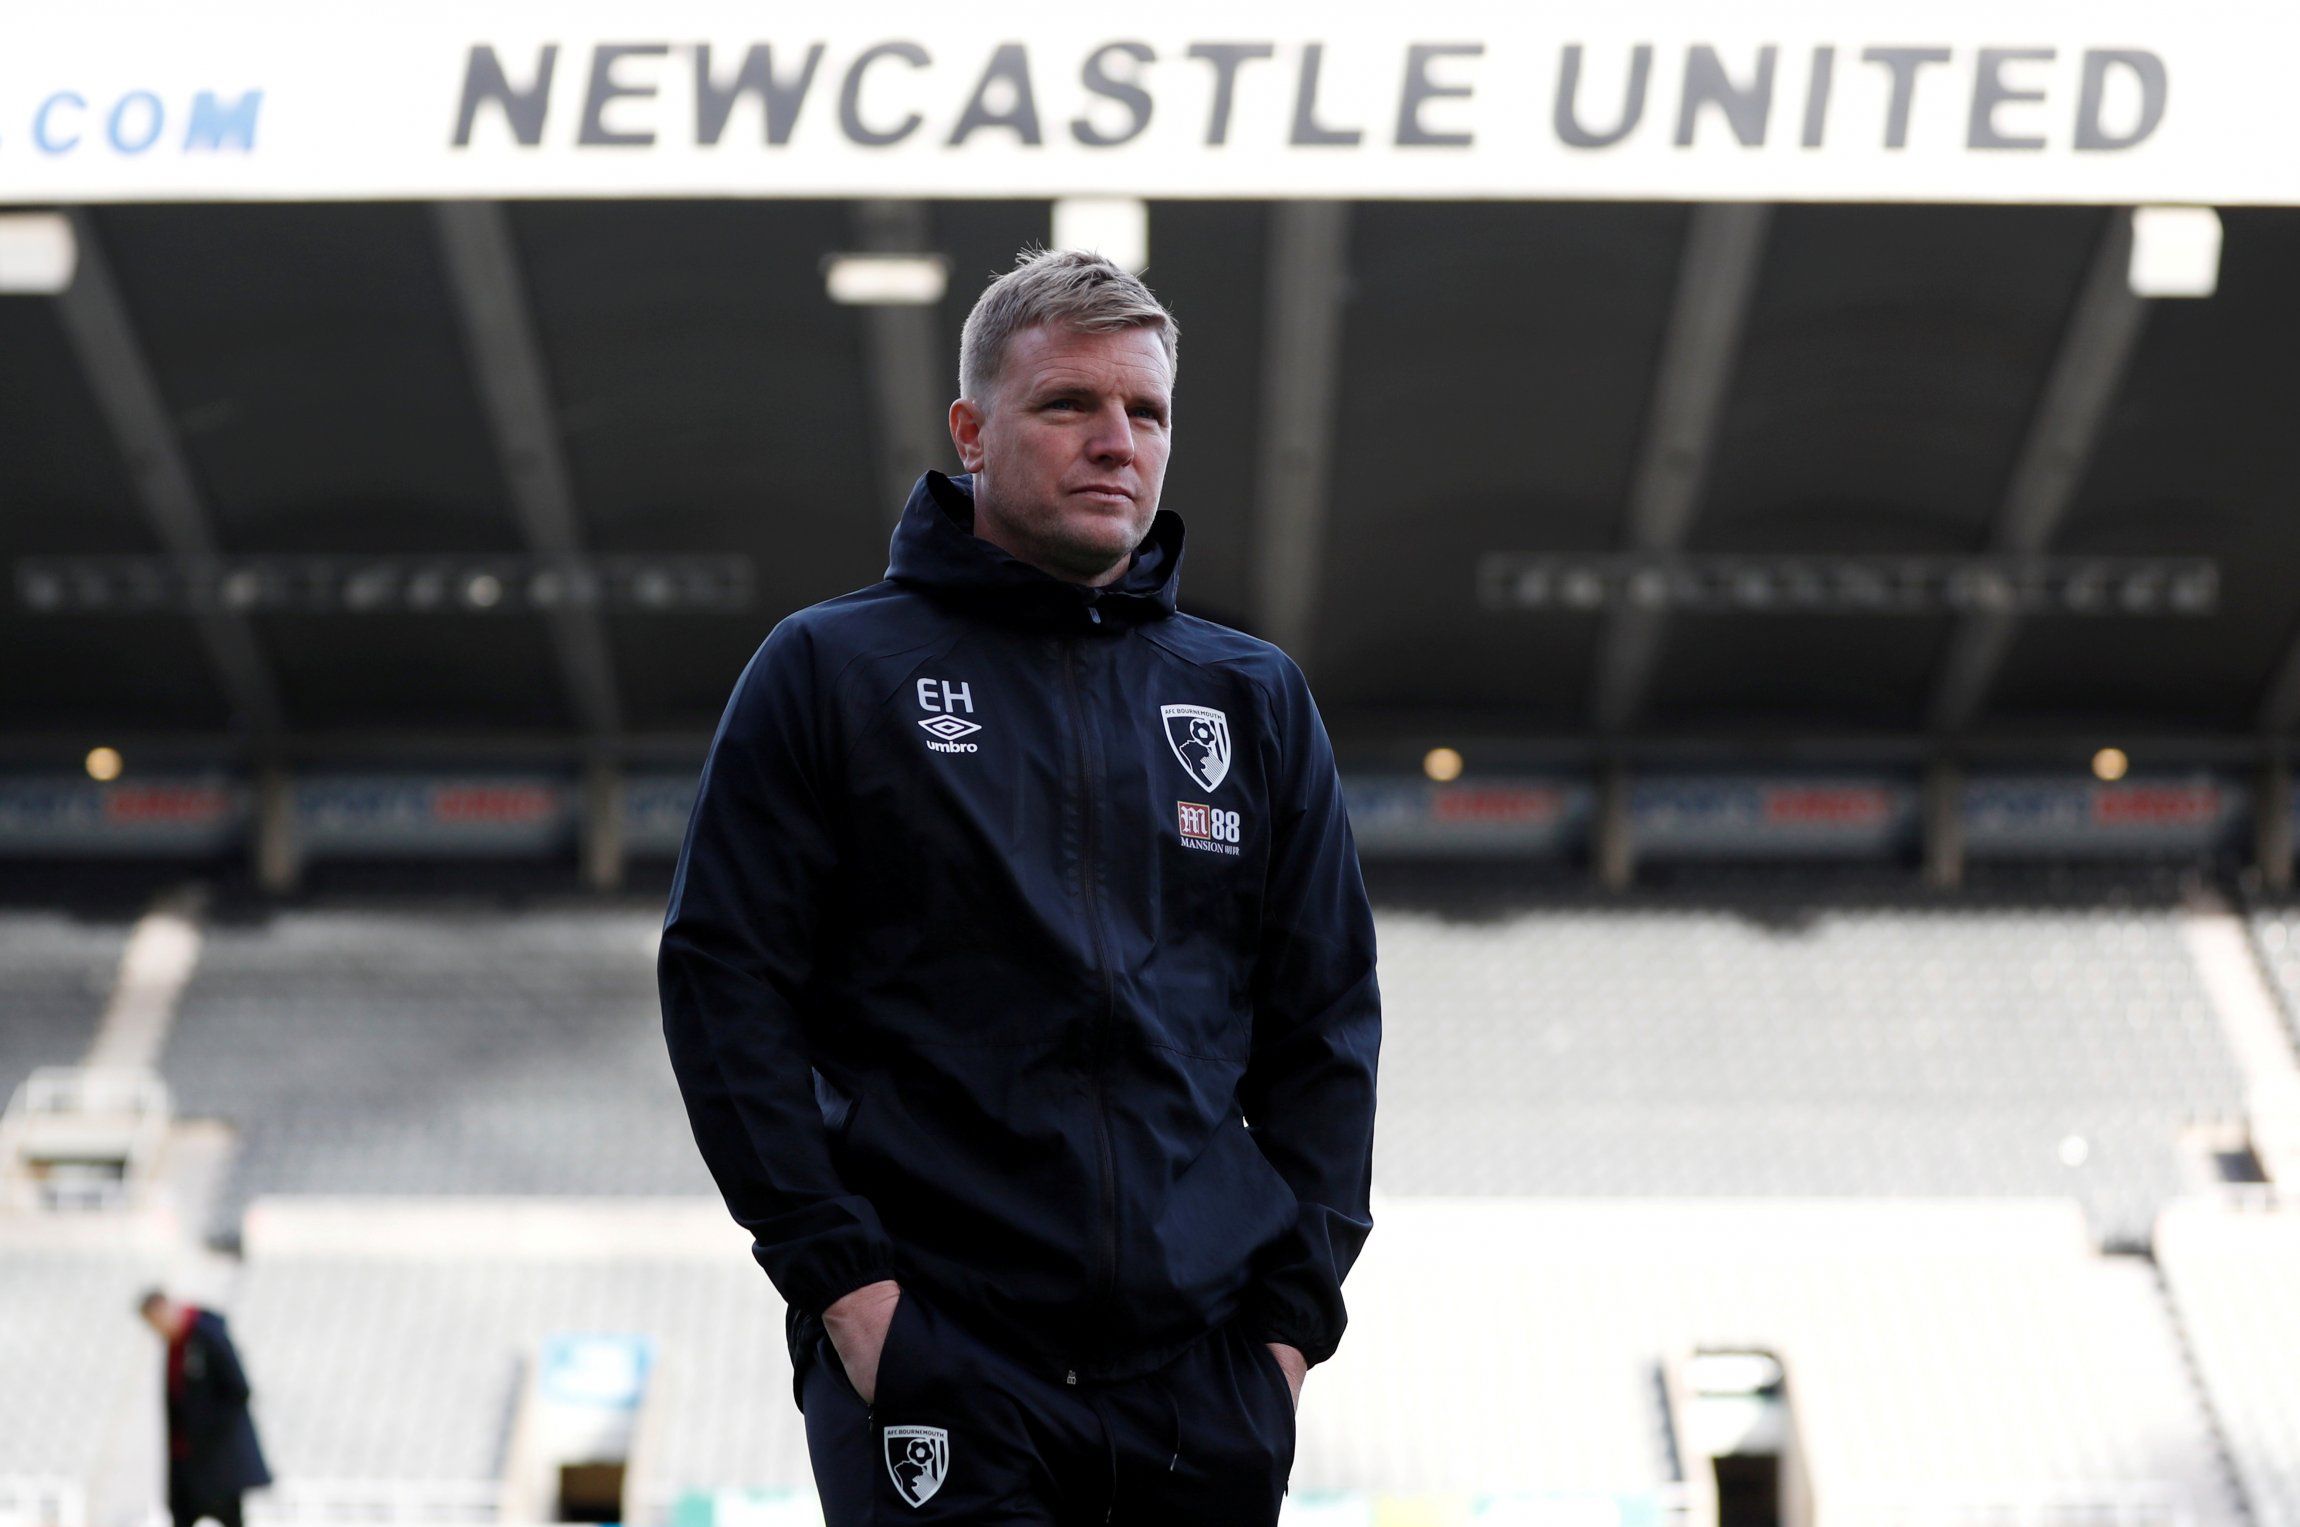 ex-AFC Bournemouth manager Eddie Howe looks on at St James' Park before Premier League clash vs Newcastle United